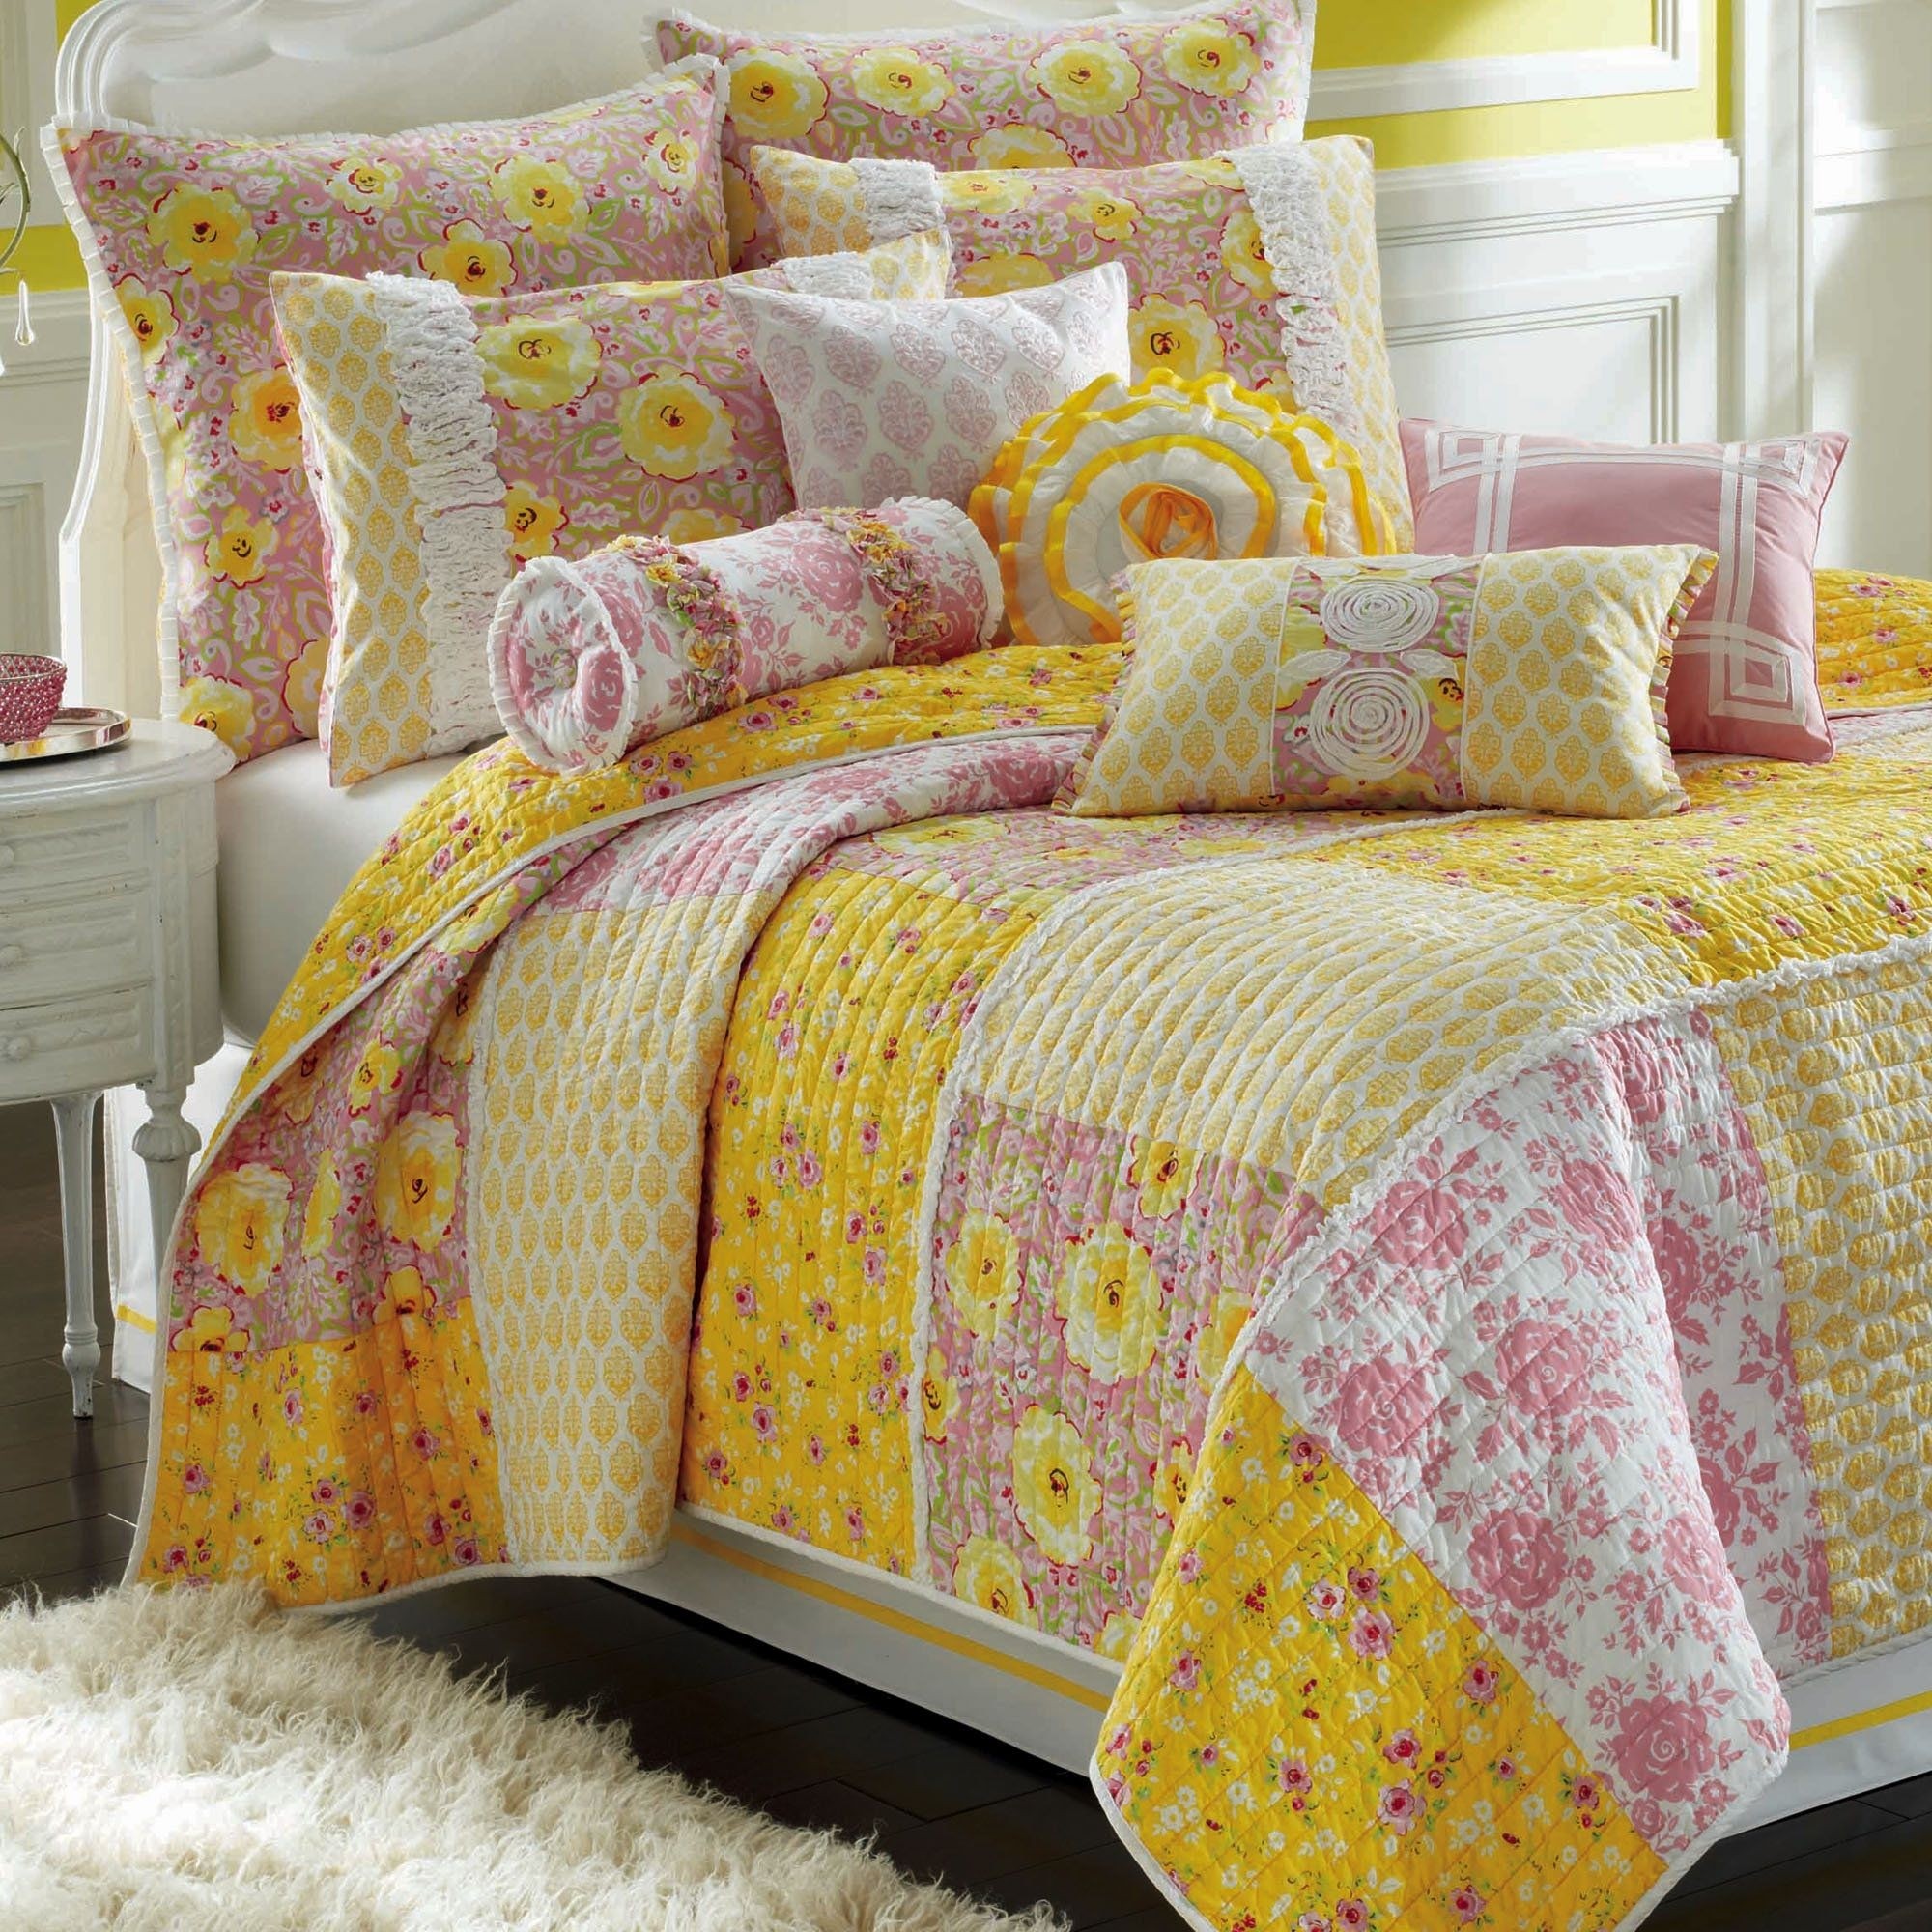 Home arianna cotton floral patchwork quilts by dena home